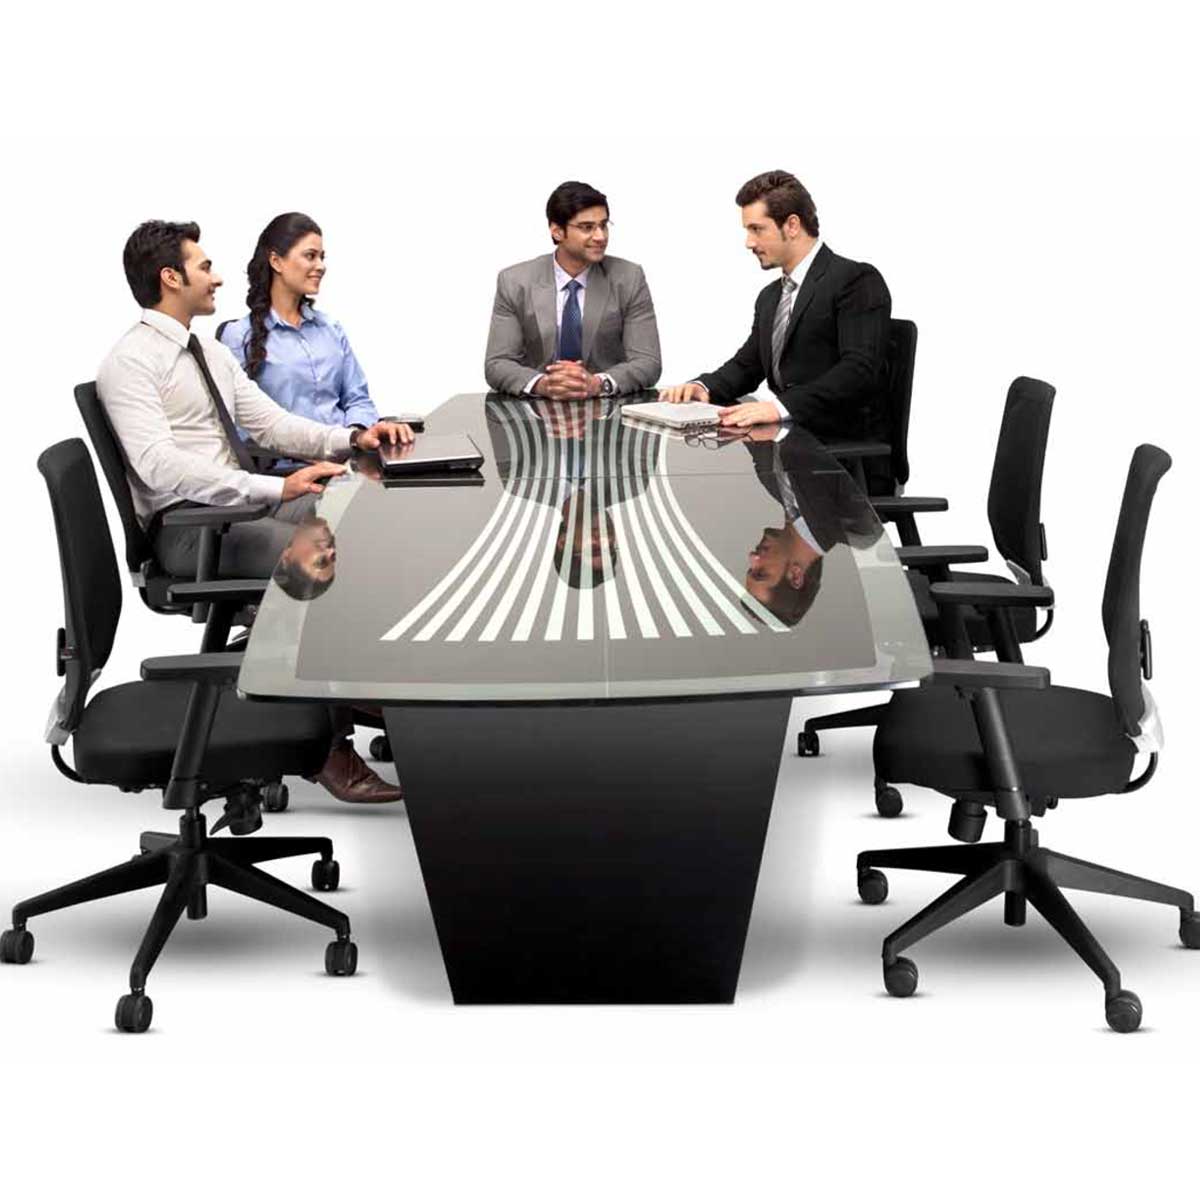 Metal Office Table Manufacturers, Suppliers in Rohini Sector 9